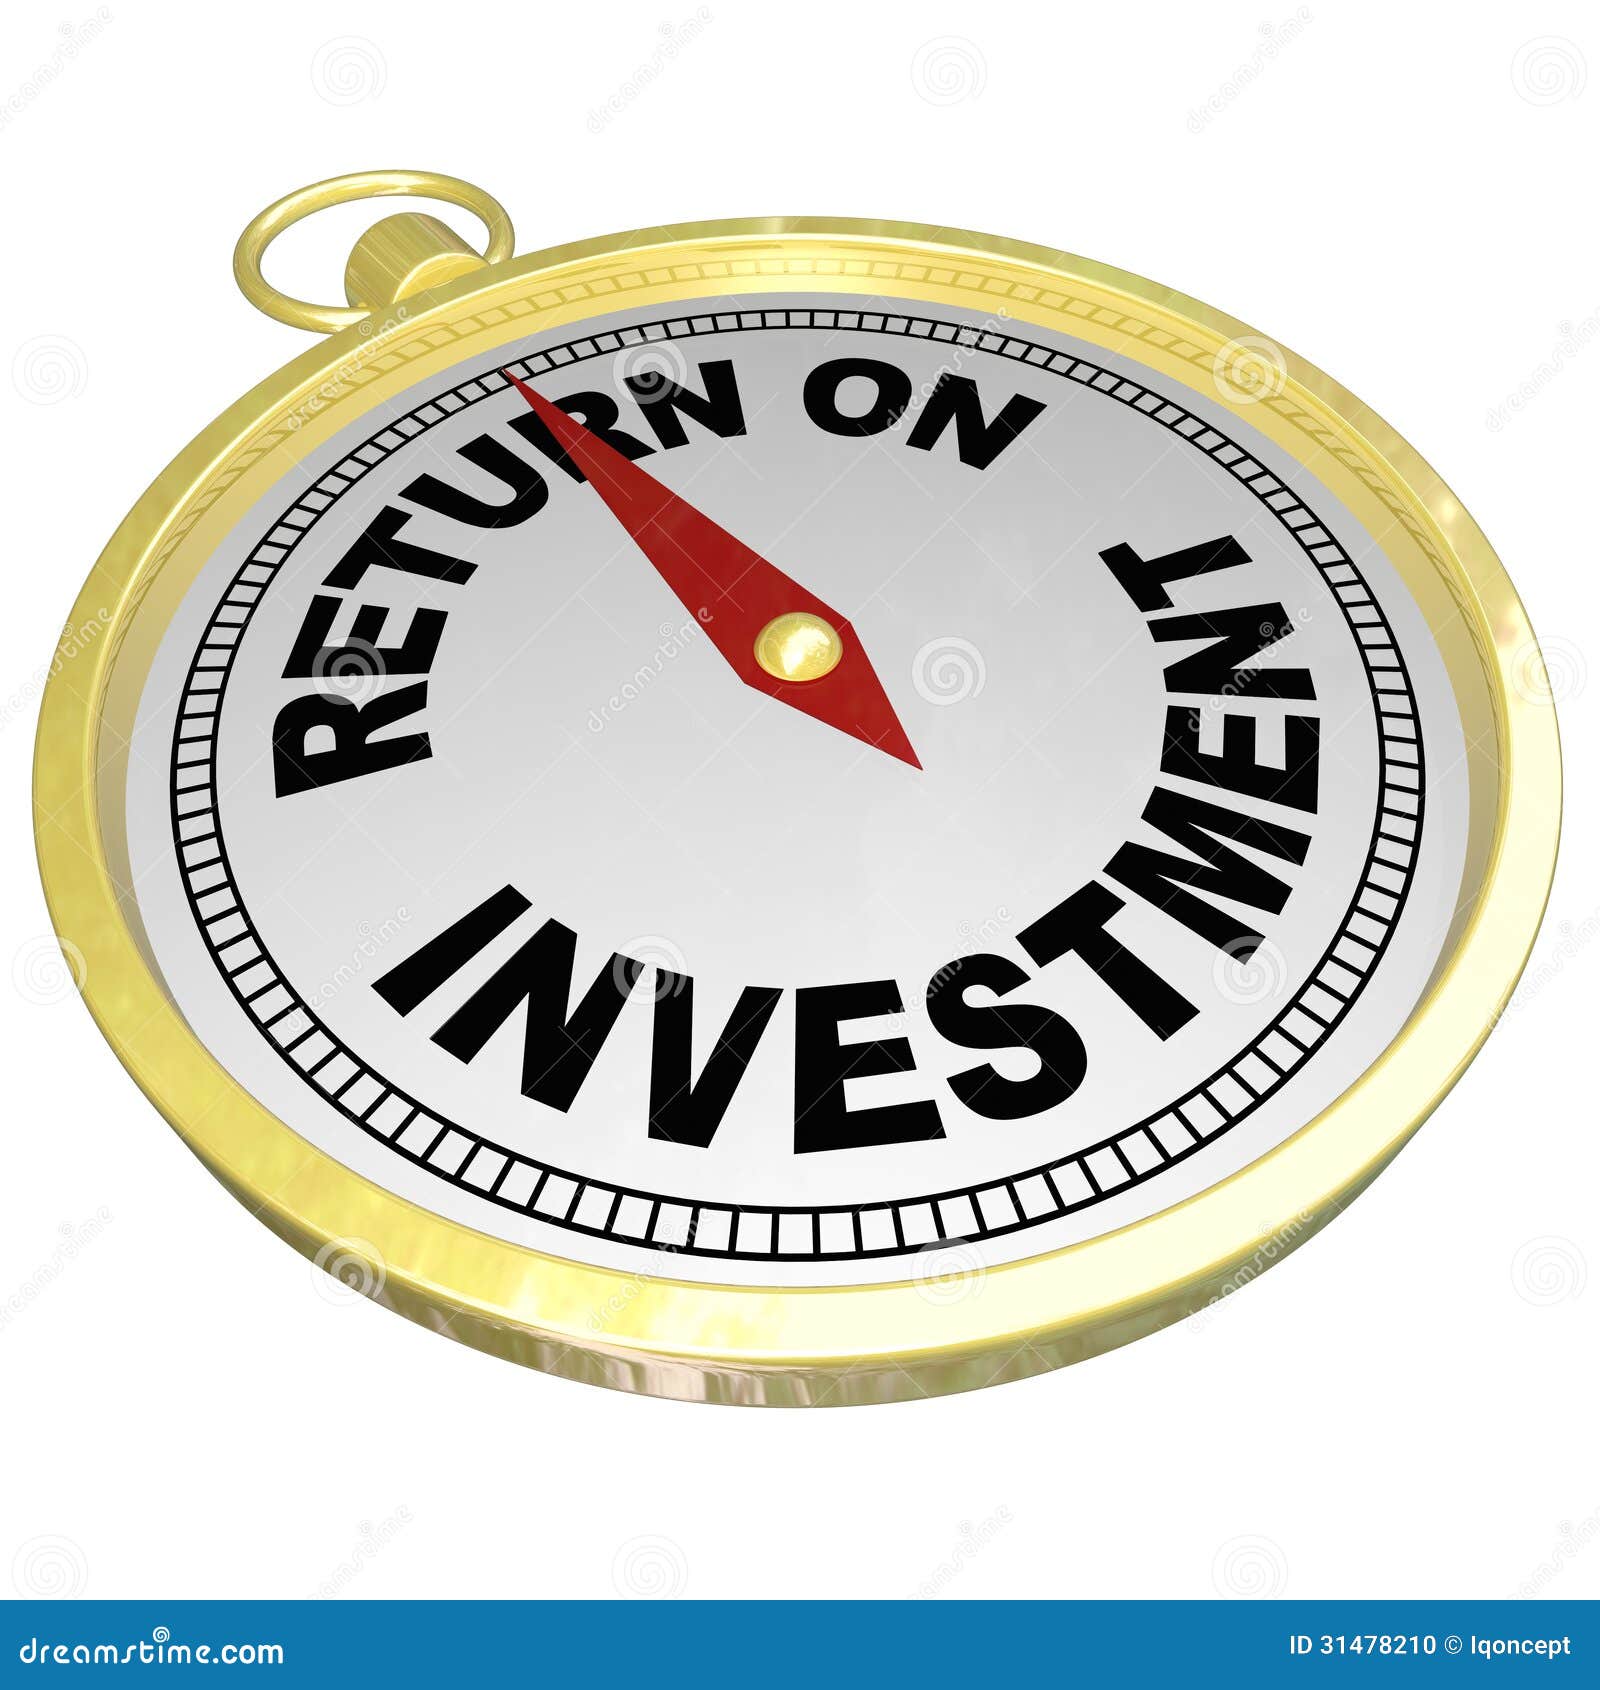 return on investment compass pointing to roi money choices